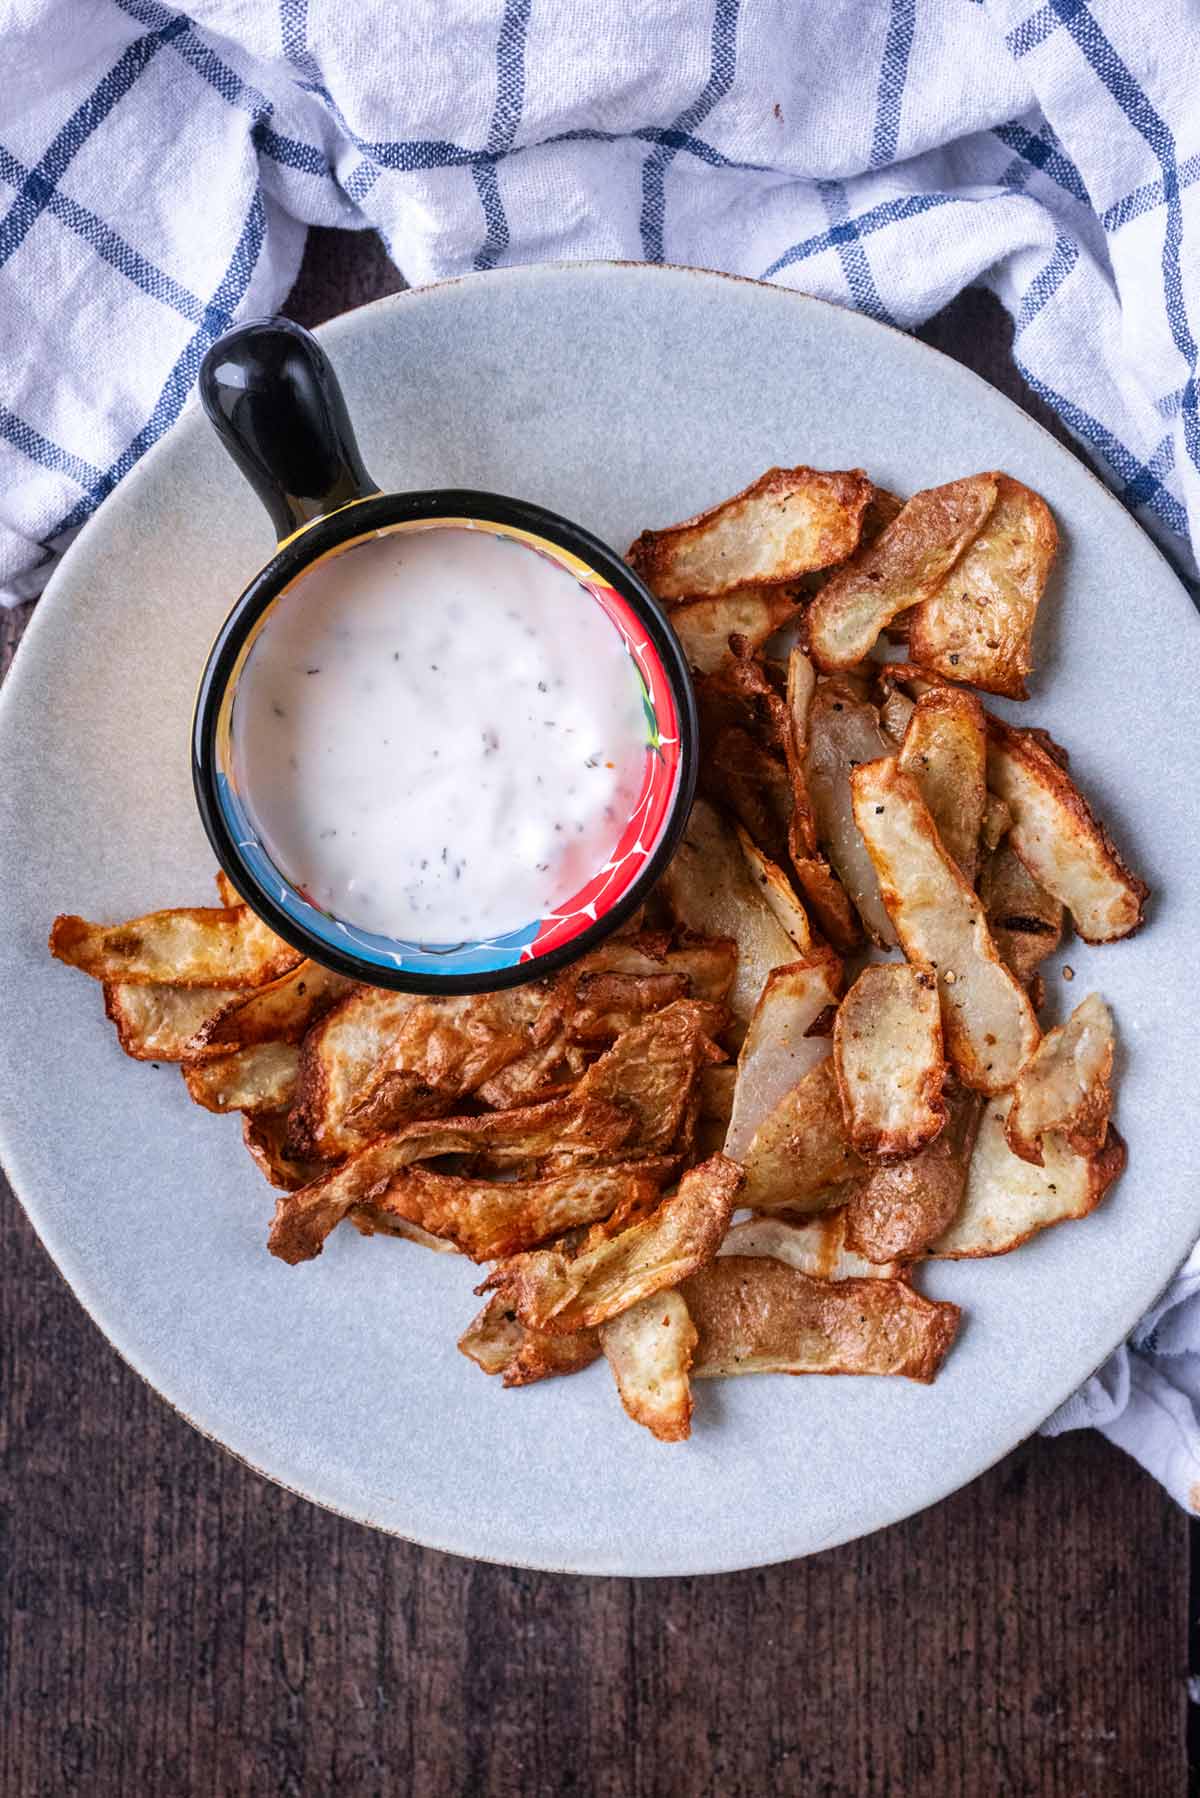 Crispy potato peelings on a plate with a small bowl of white dip.